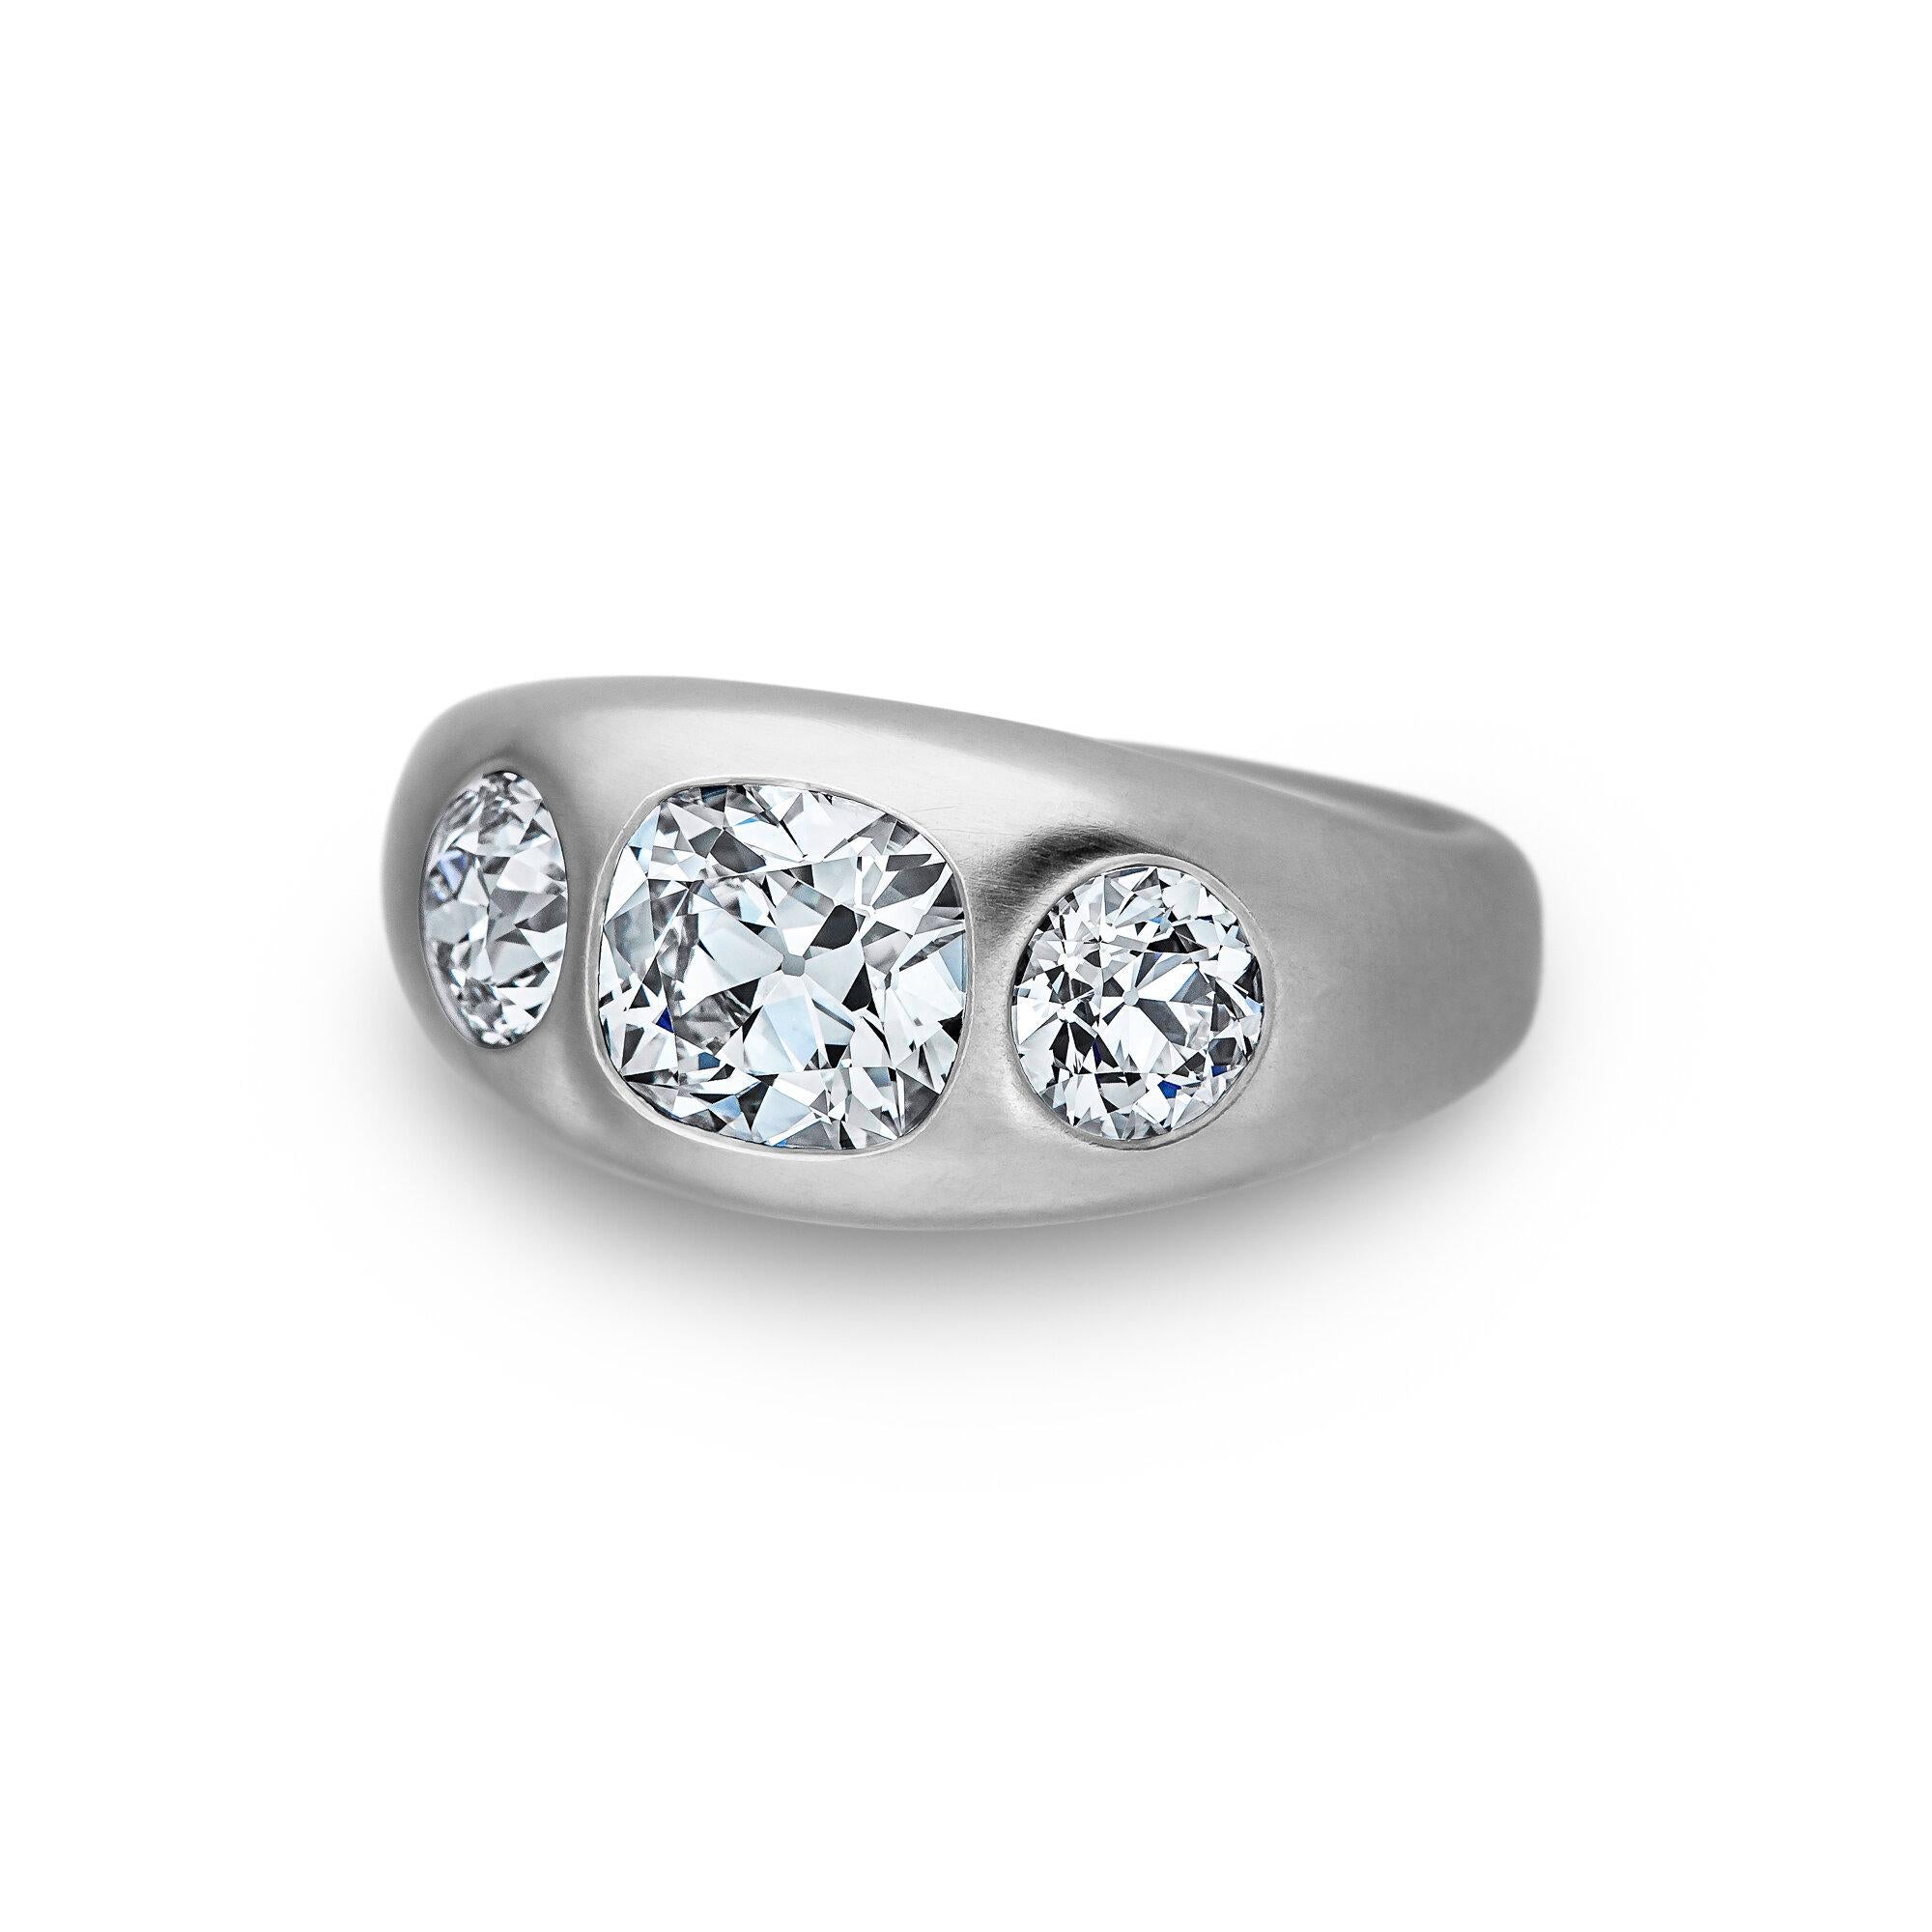 It's a triple header! With two scintillating old euro round cut diamonds surrounding one cushion brilliant cut center diamond, this handmade three stone matte finished platinum burnished set ring is a grand slam.  Designed by Steven Fox Jewelry. 